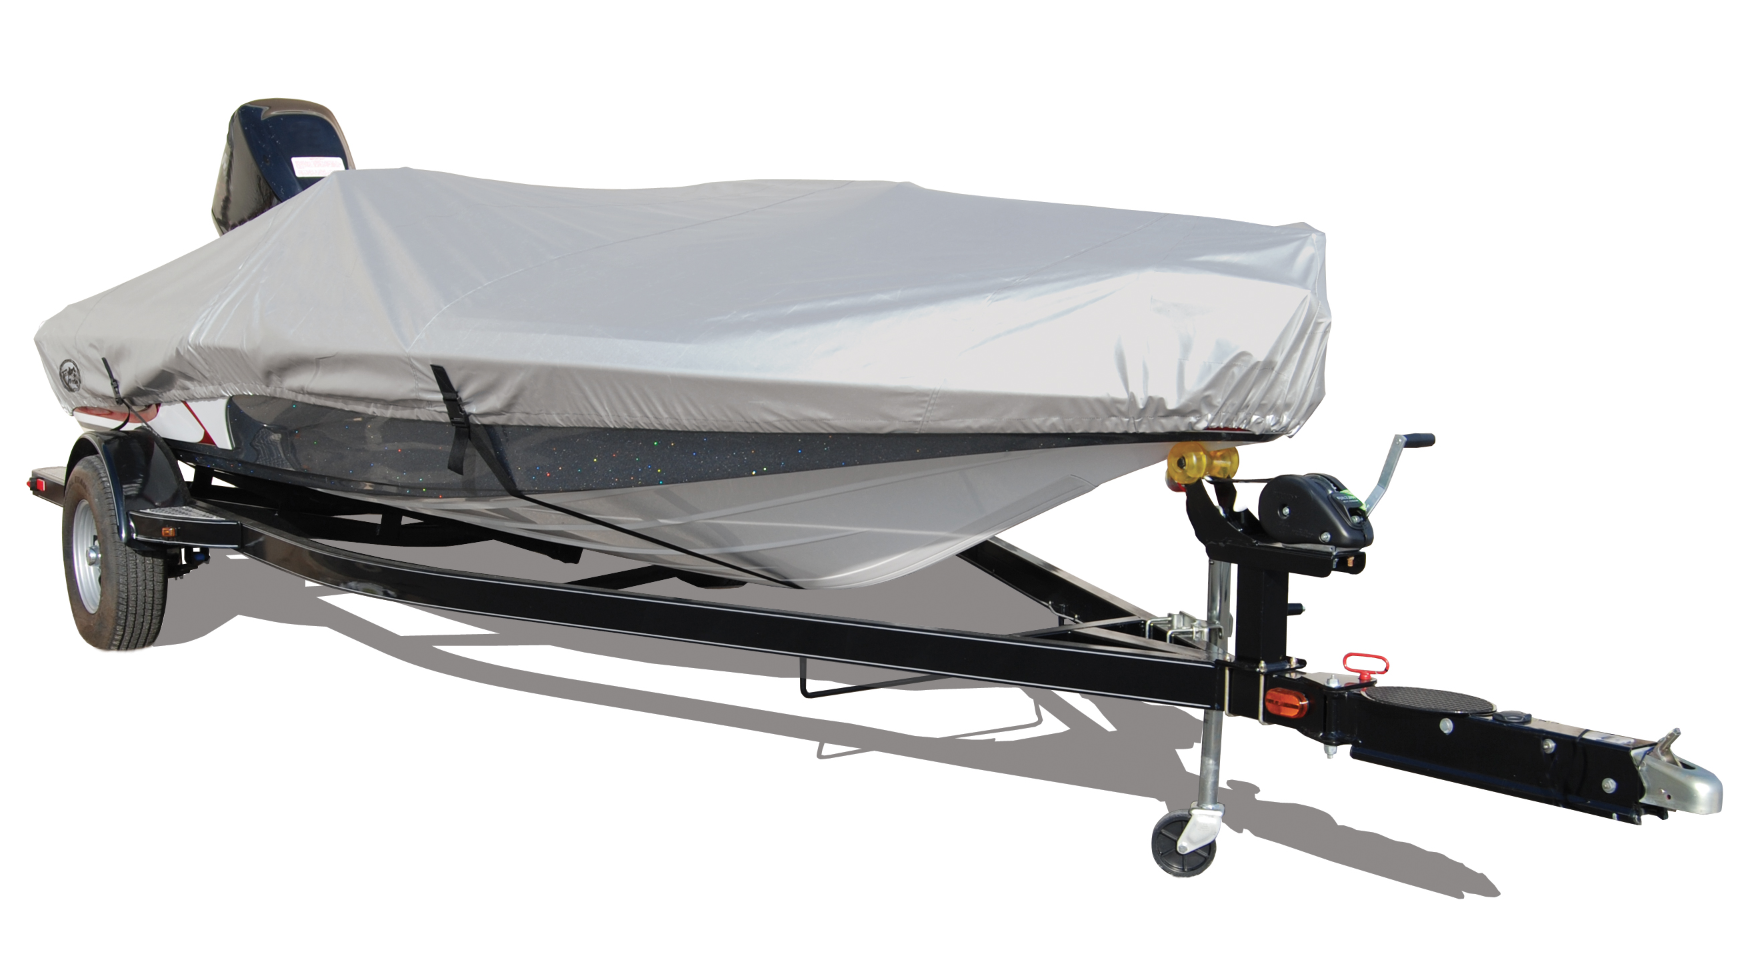 <b>Taylor Made</b><br>	Trailerite Pro Series Boat Cover<br>	Featuring reflective strips sewn into the sides of stern, these boat covers fit a variety of sizes and include quick-relase 2-inch wide belly straps that eliminate stress and prevent abrasion. 